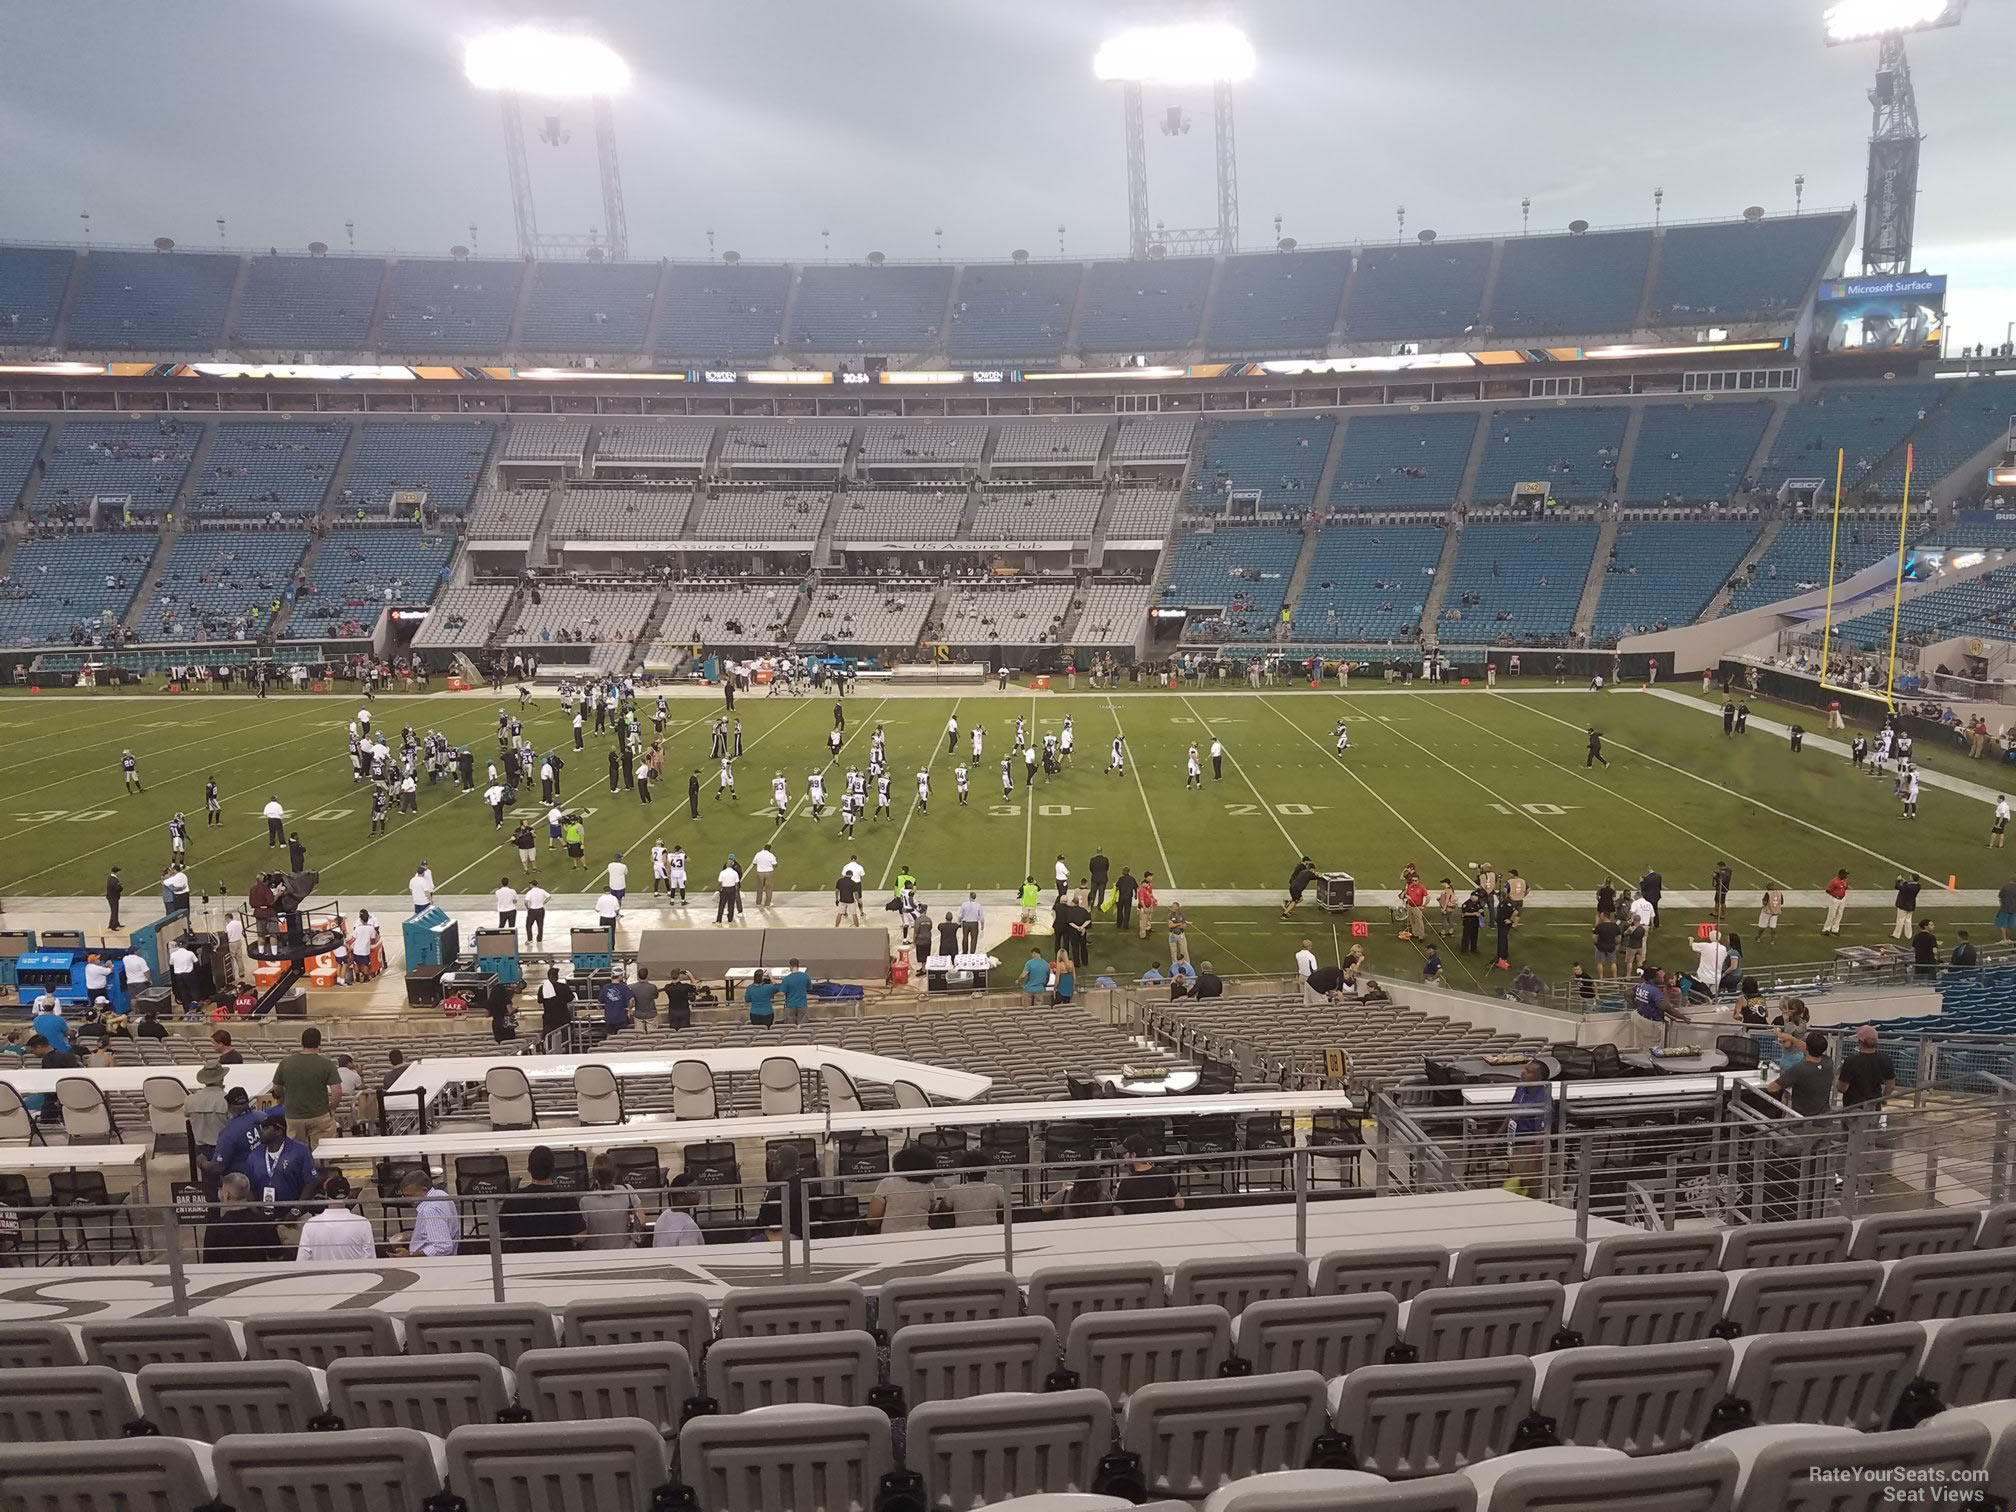 section 108, row h seat view  - tiaa bank field